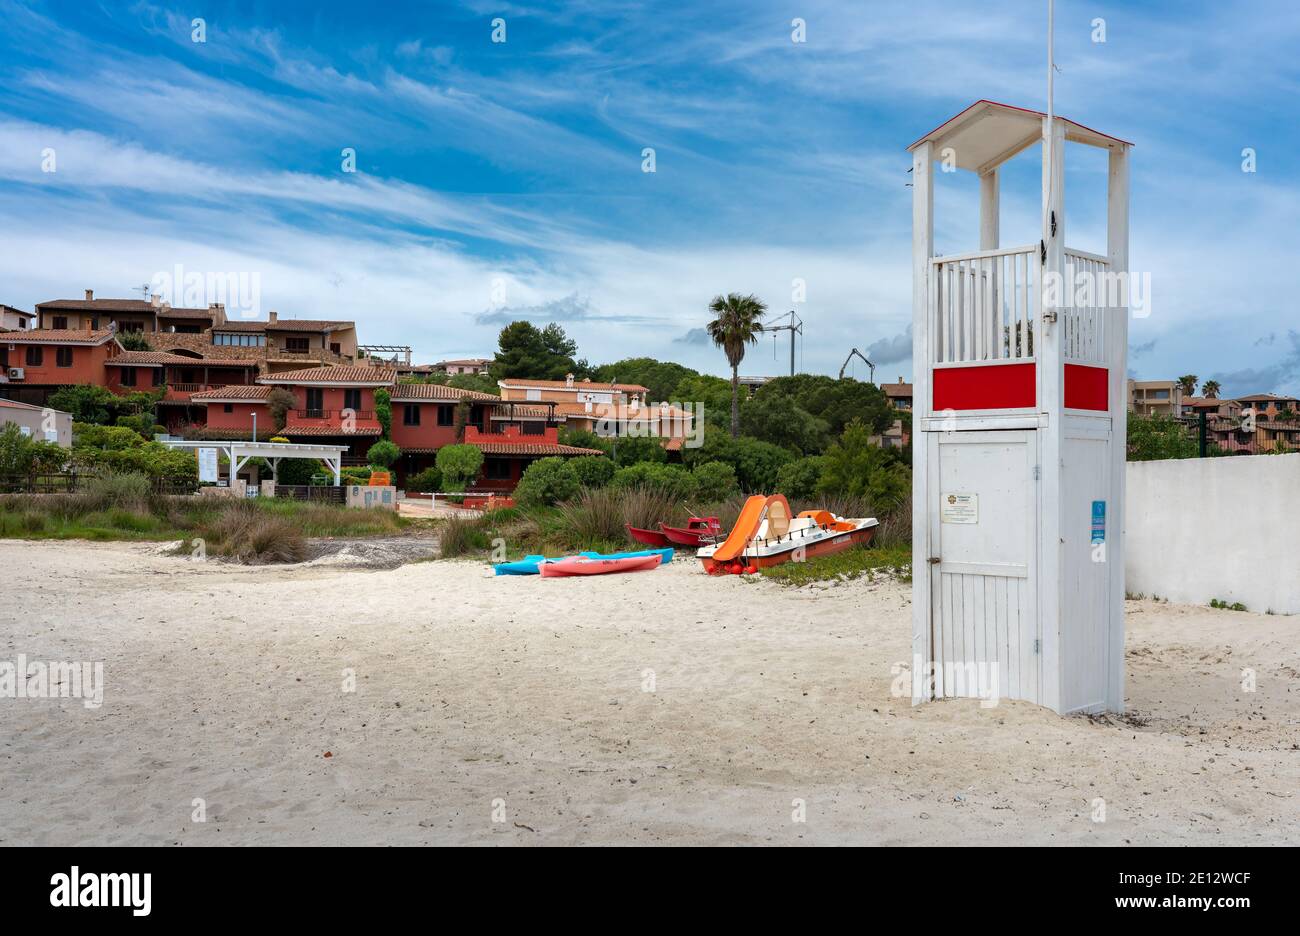 Tower For The Lifeguard On The Beach In Sardinia Stock Photo